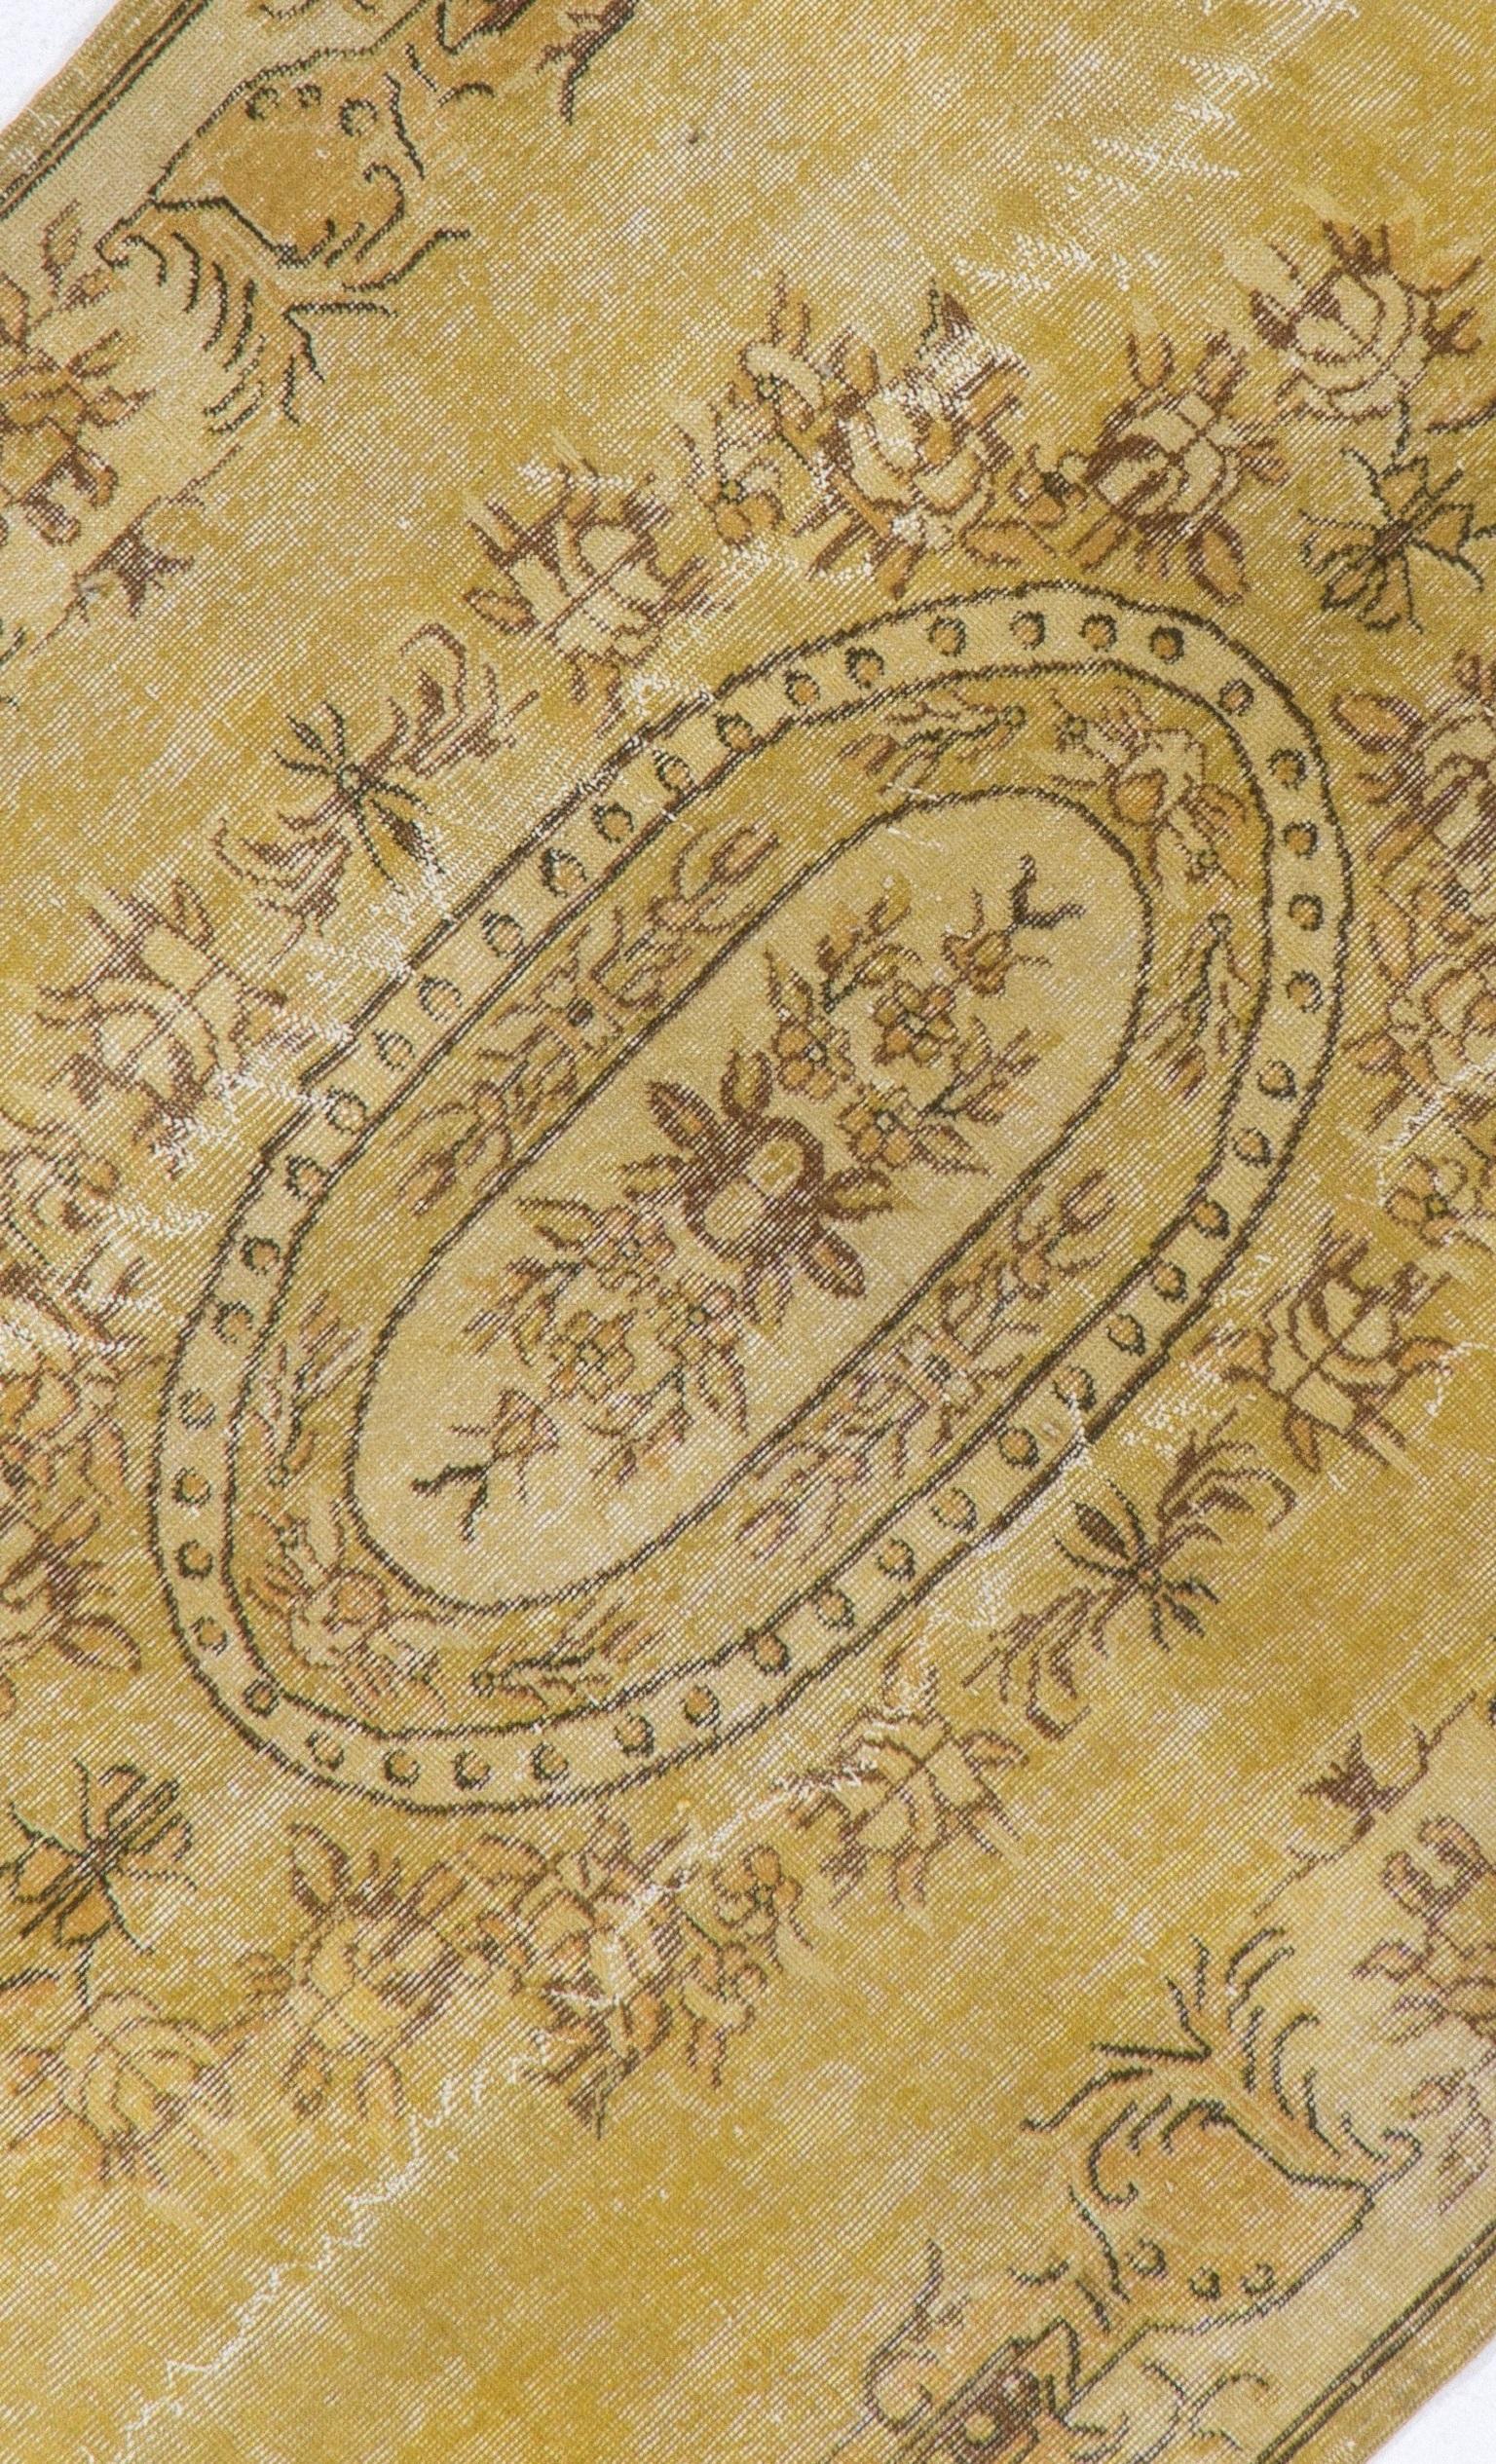 Hand-Knotted 5.2x9 Ft Handmade Vintage Baroque Style Area Rug in Yellow. Modern Wool Carpet For Sale